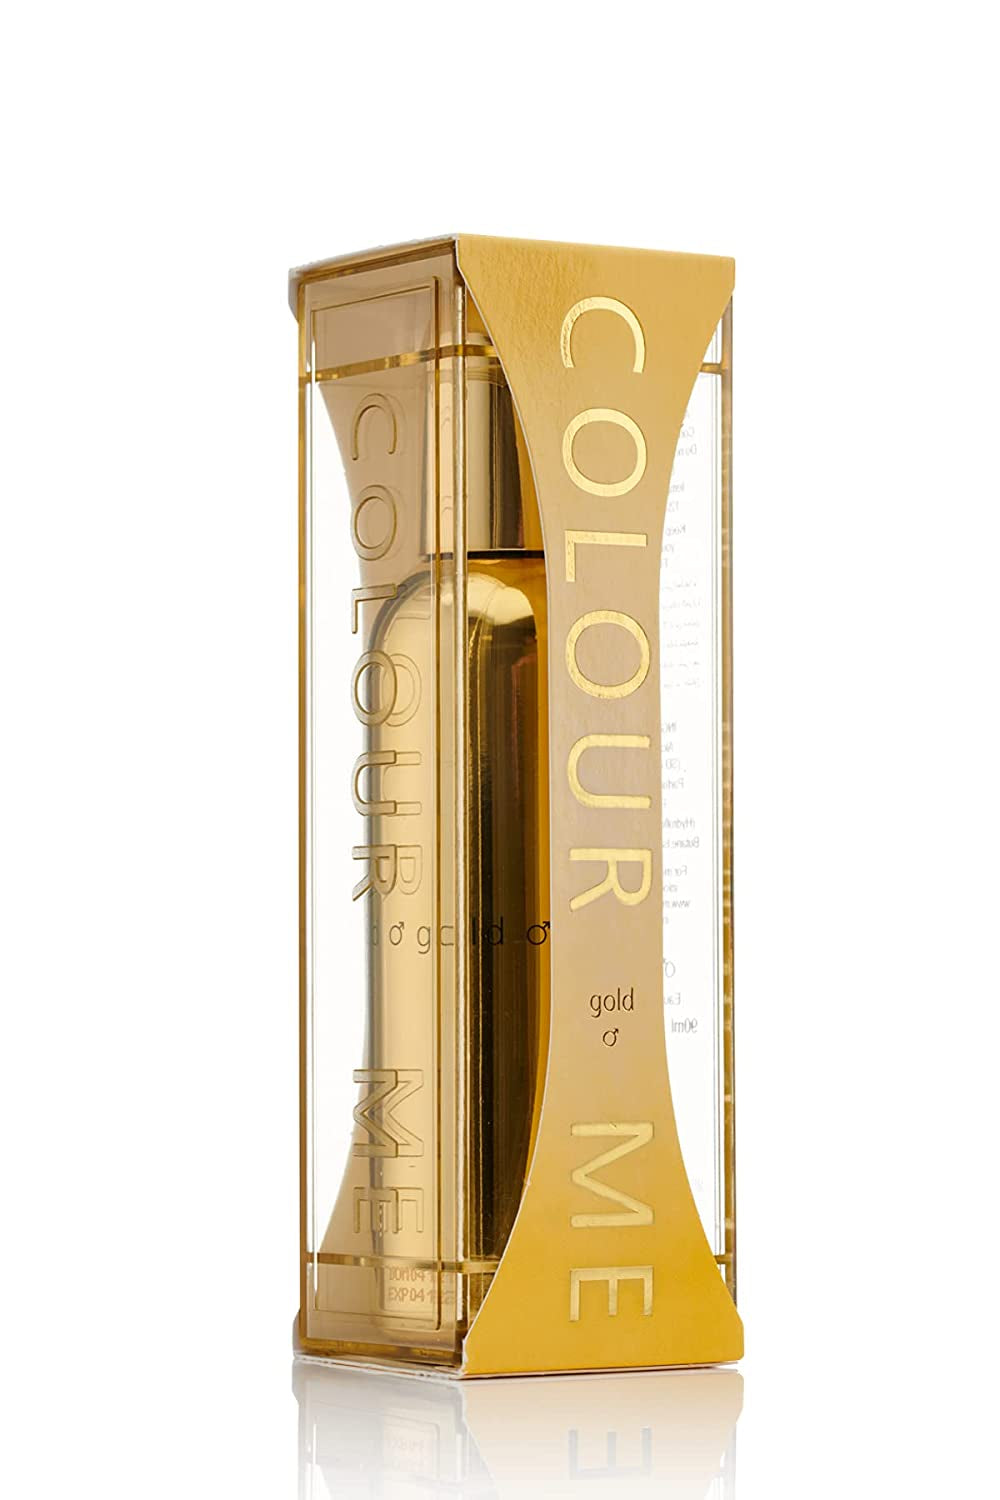 Colour Me Gold Homme by Milton-Lloyd - Perfume for Men - Spicy Aromatic Fragrance - Opens with Spices, Leather, Patchouli, and Amber - Enduring Scent Exudes Persistence - 3 oz EDP Spray